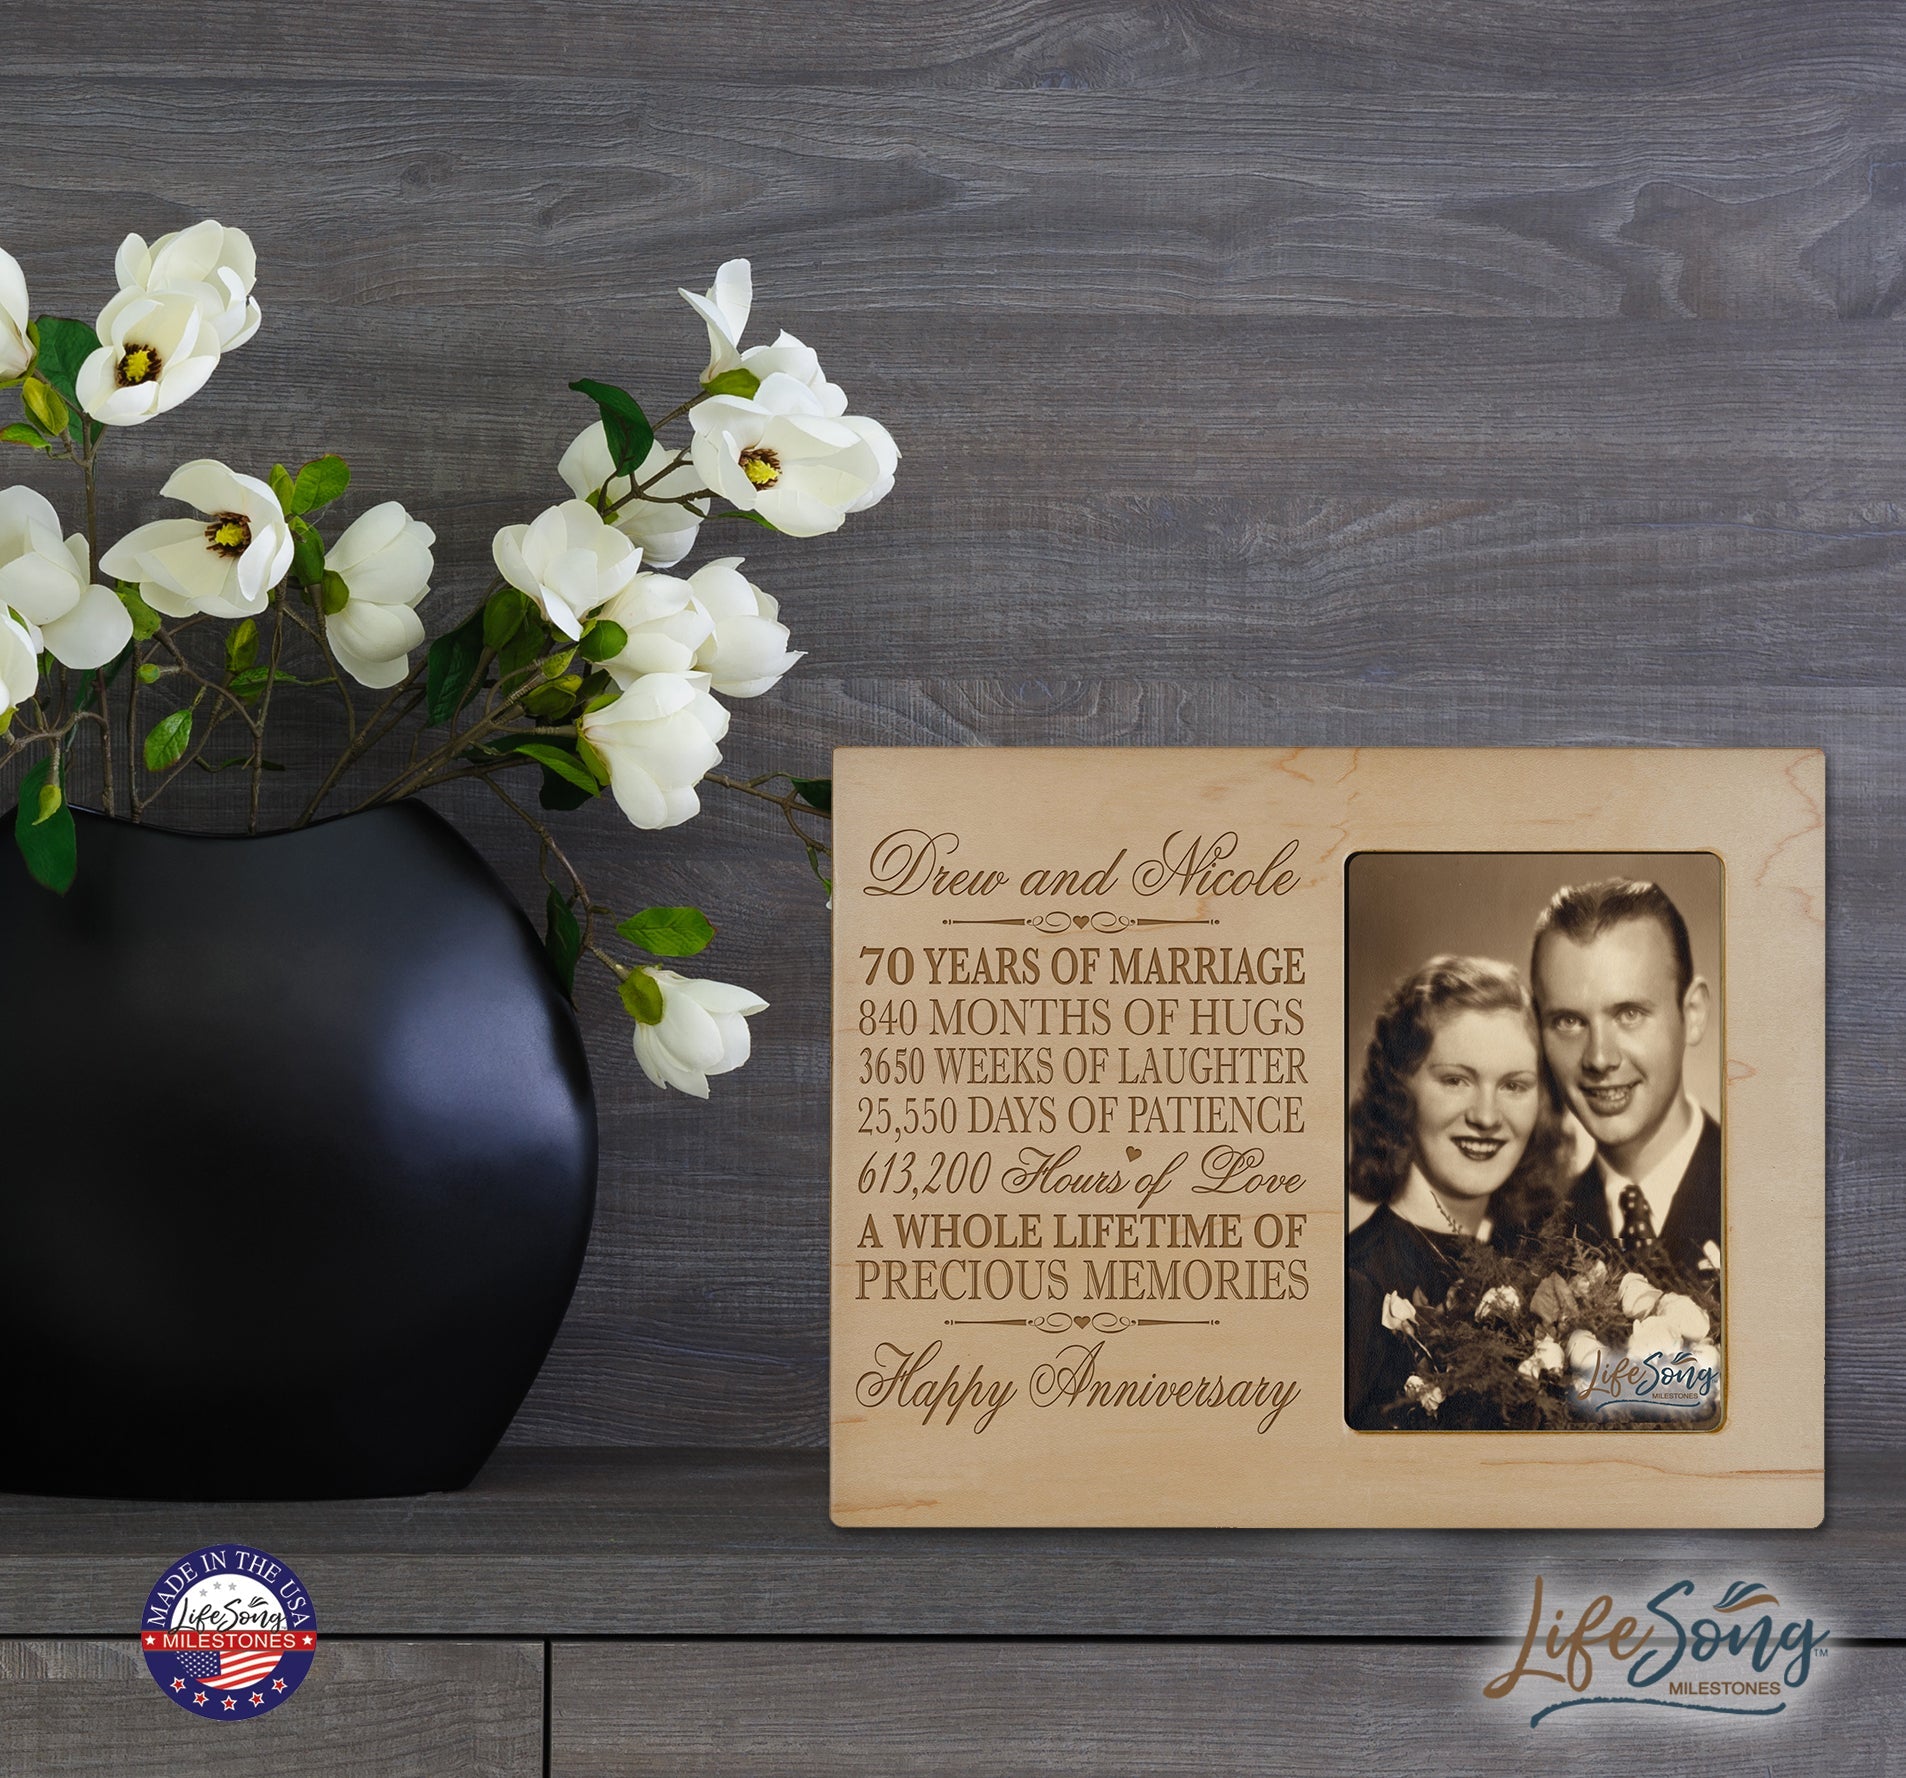 Lifesong Milestones Personalized 70th Wedding Anniversary Picture Frame Wall Decor